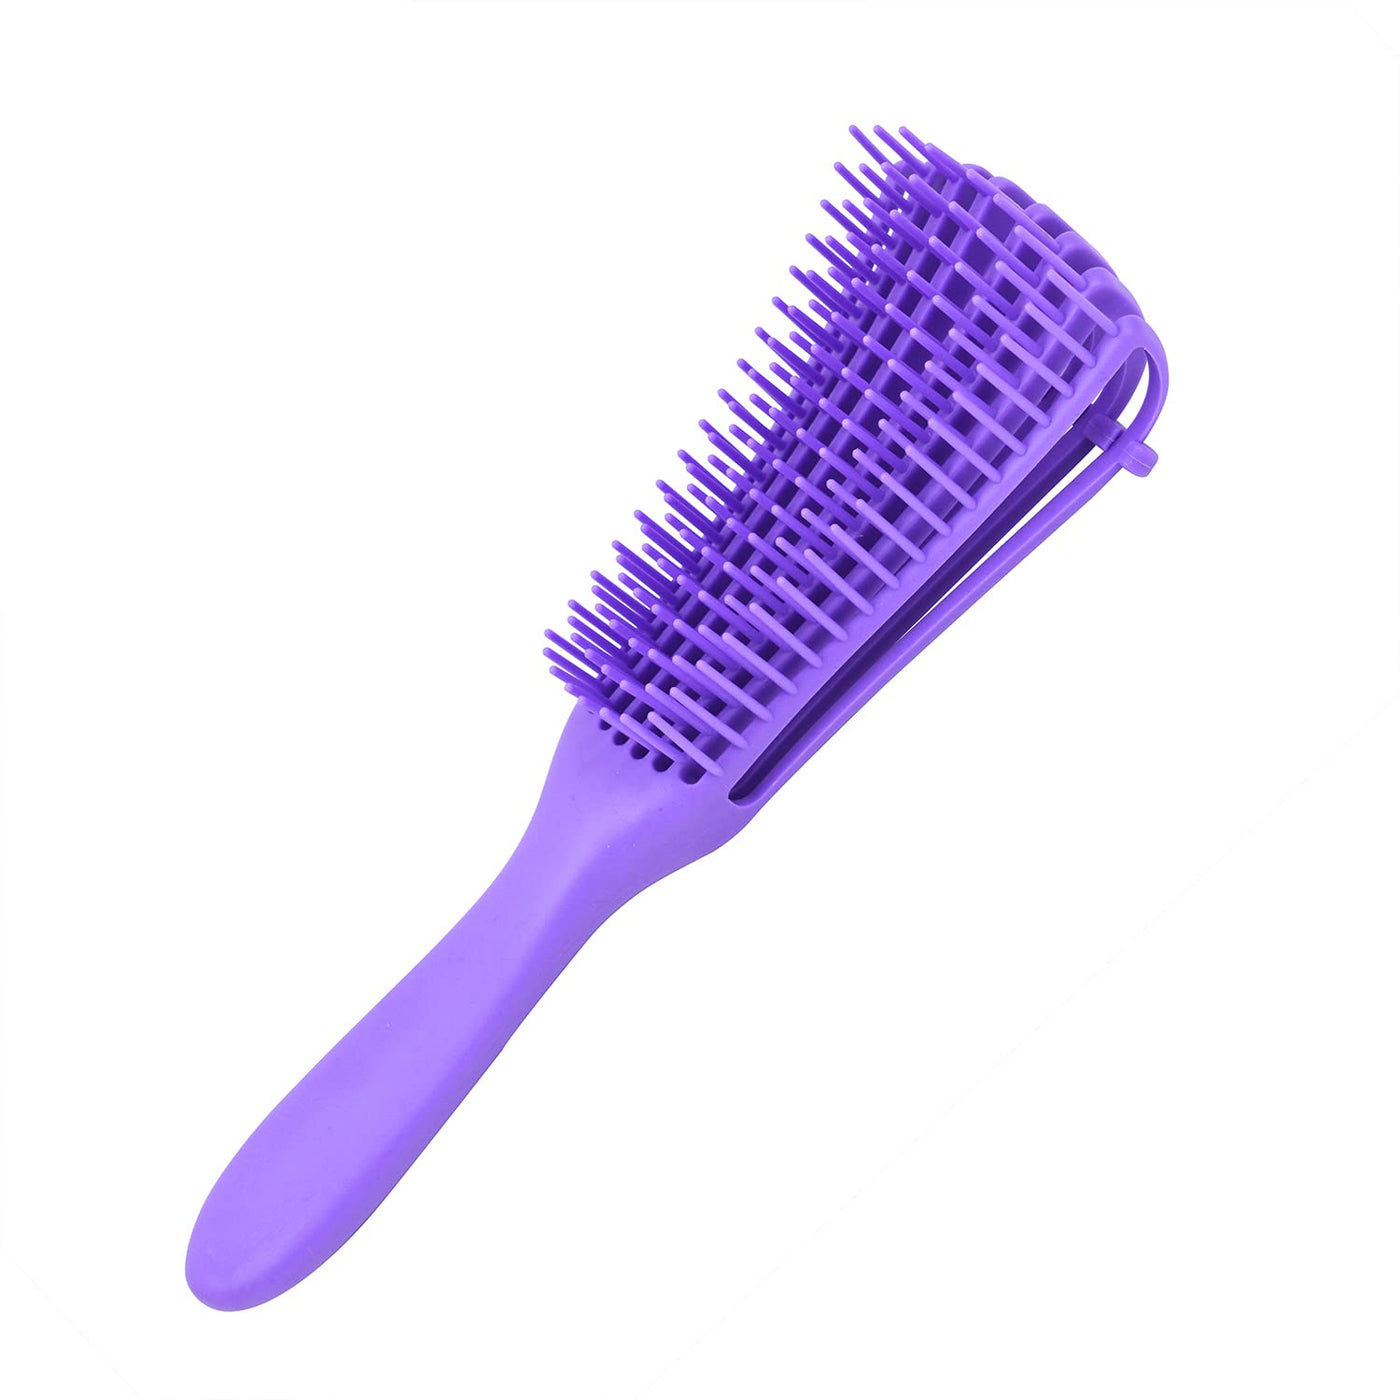 Hair Detangler Brush for Afro America/African Hair Textured 3a to 4c Kinky Wavy/Curly/Coily/Wet/Dry/Oil/Thick/Long Hair, Detangling Brush for Natural Hair, Exfoliating Your Scalp for Beautiful